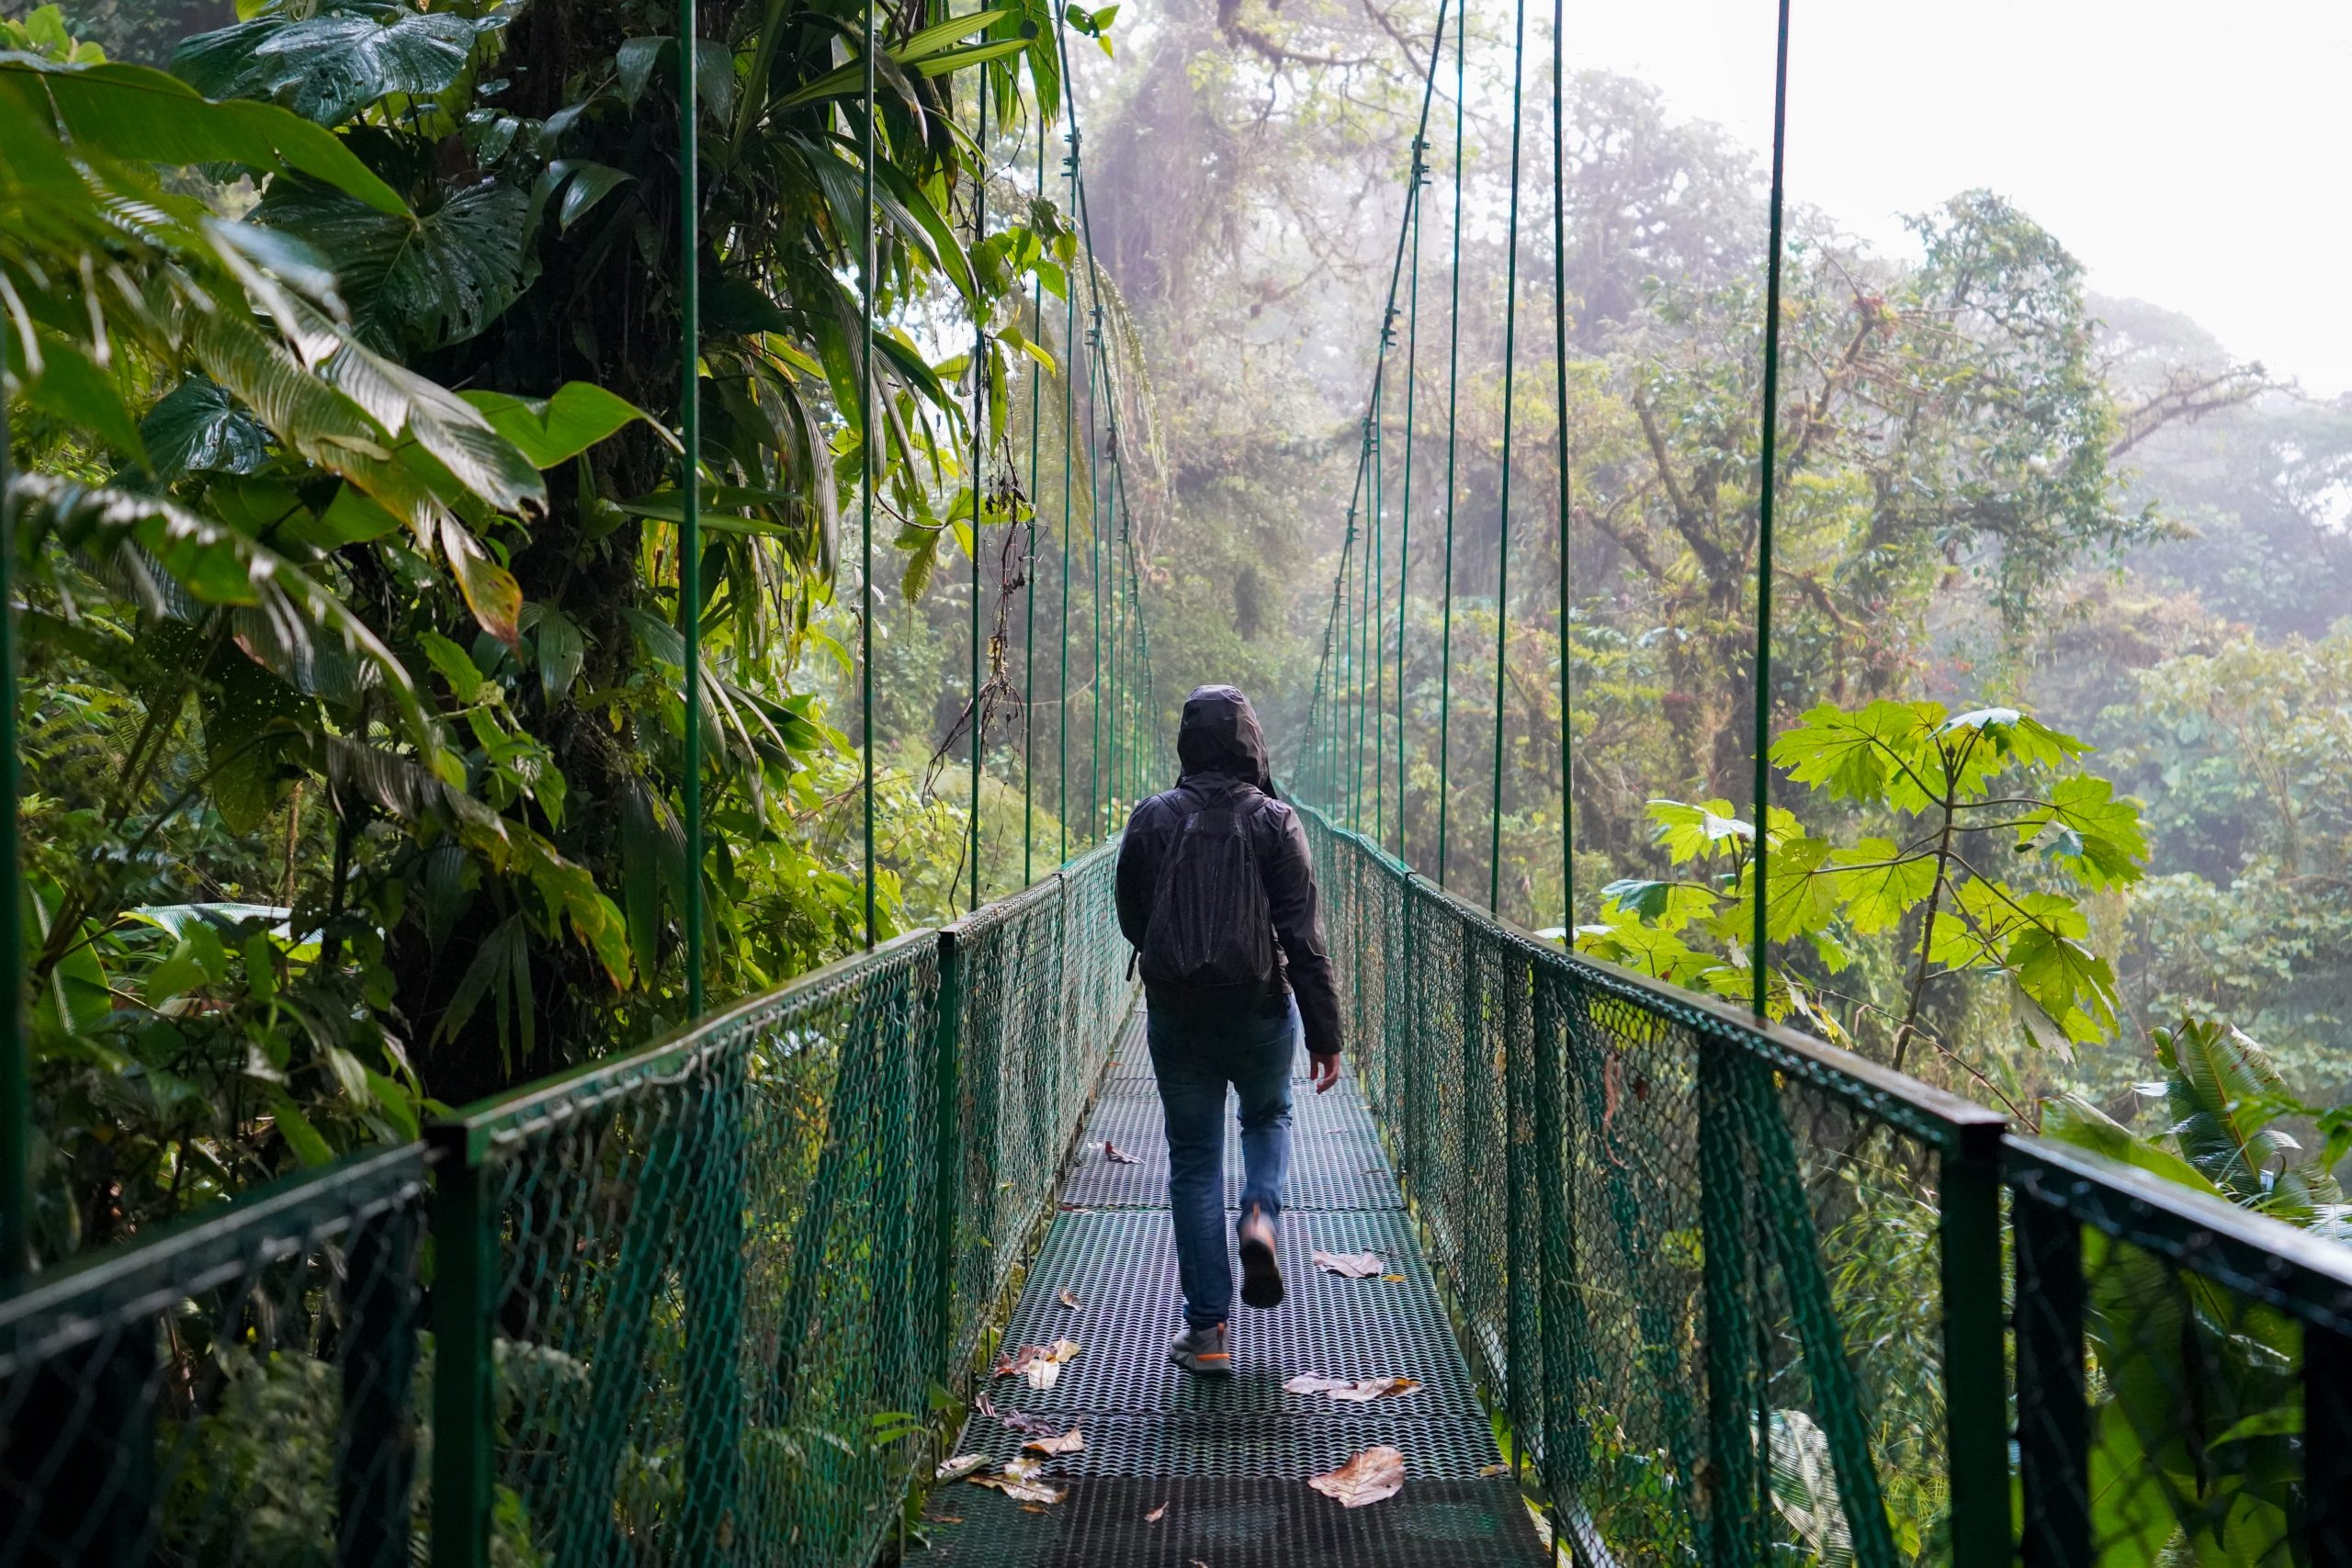 A woman wearing a green jacket crosses a swinging bridge spanning over lush green vegetation in Costa Rica